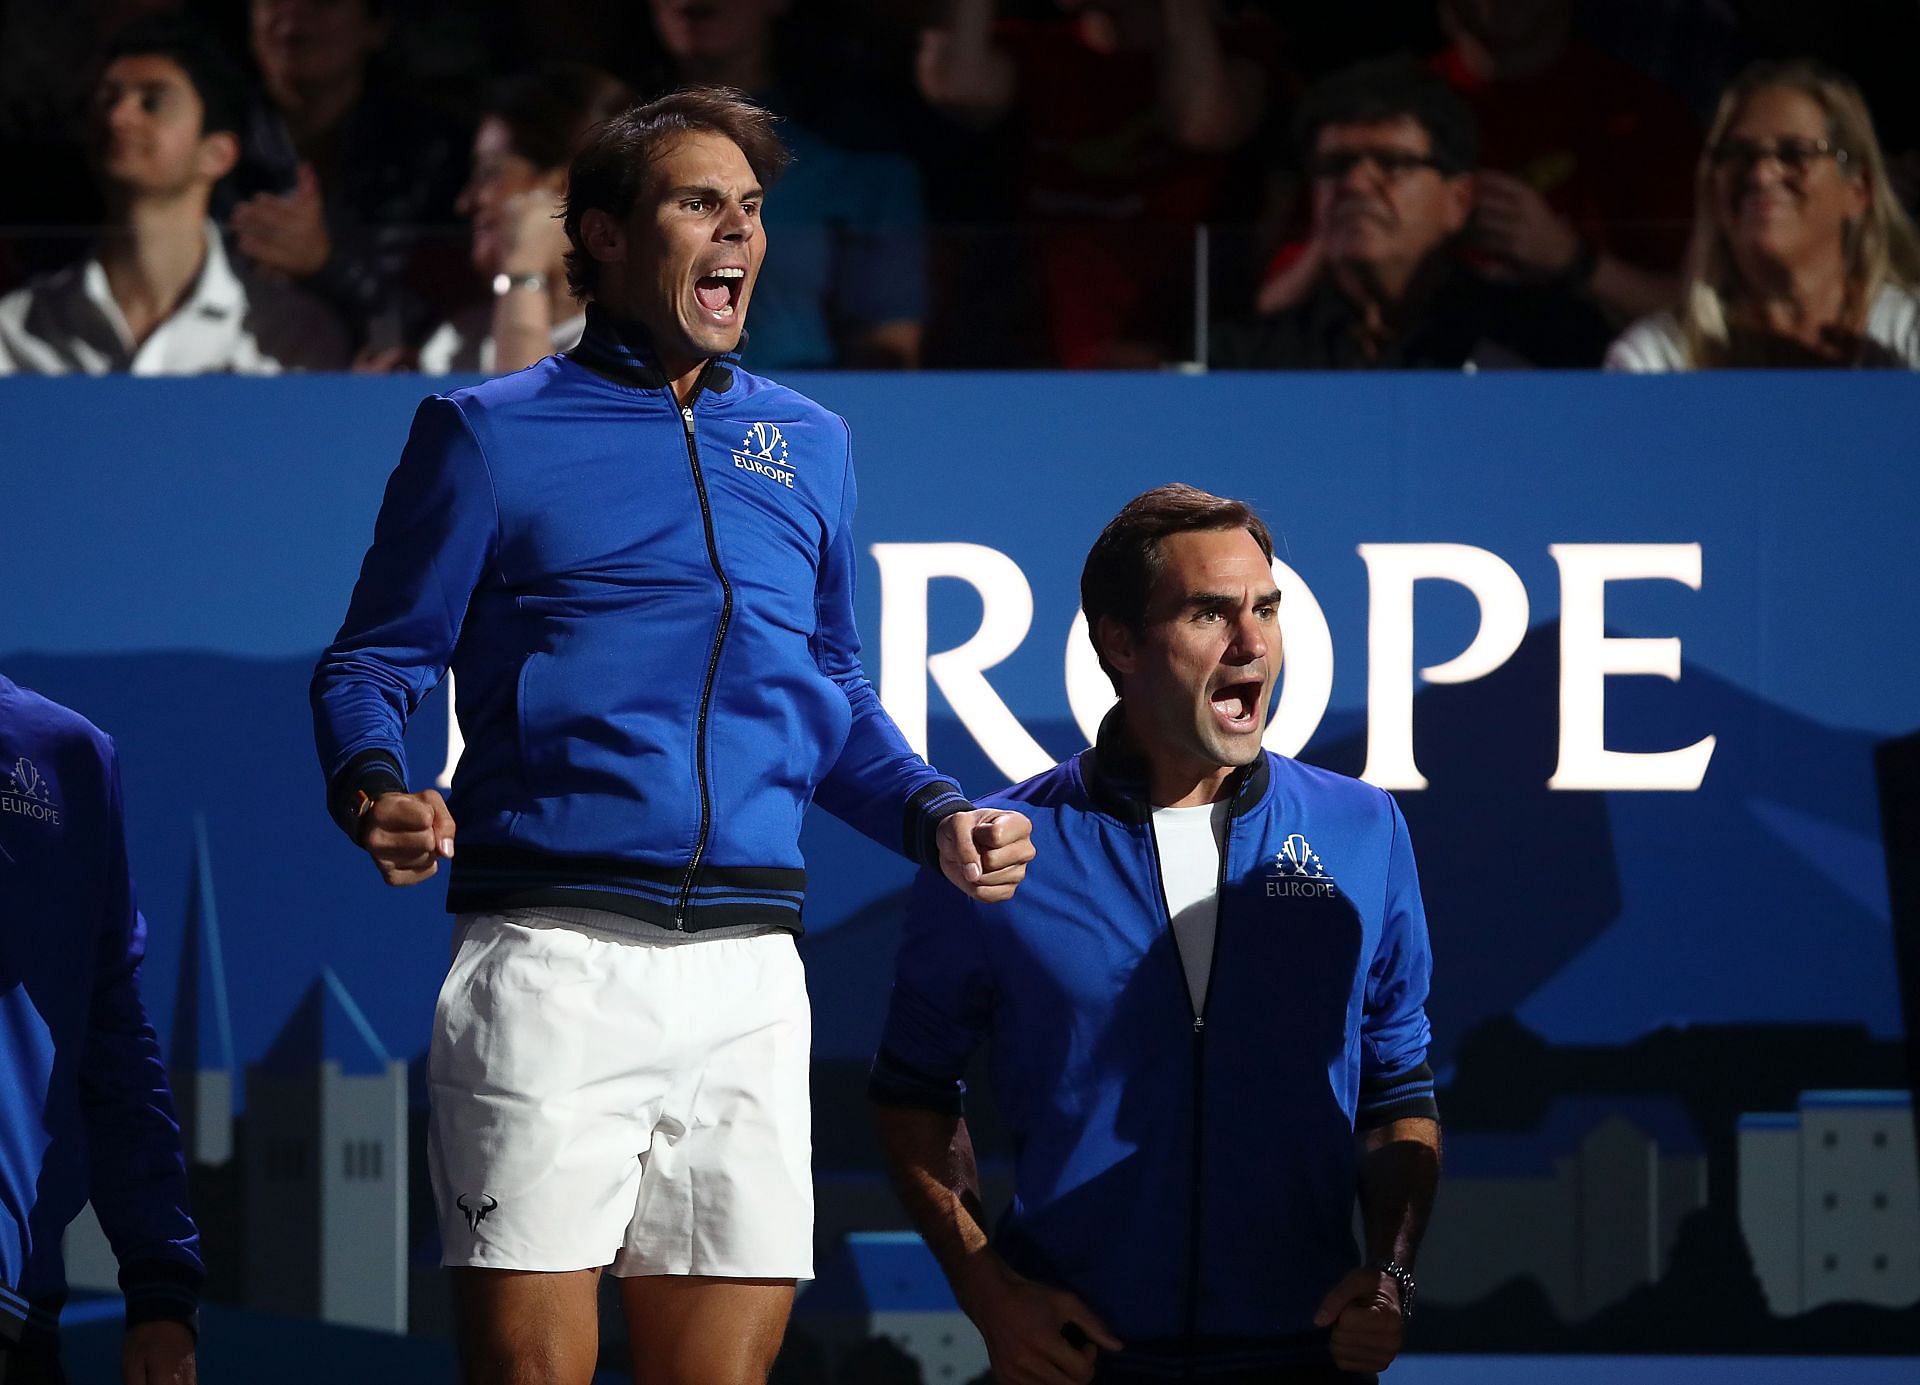 Rafael Nadal and Roger Federer at the 2019 Laver Cup.